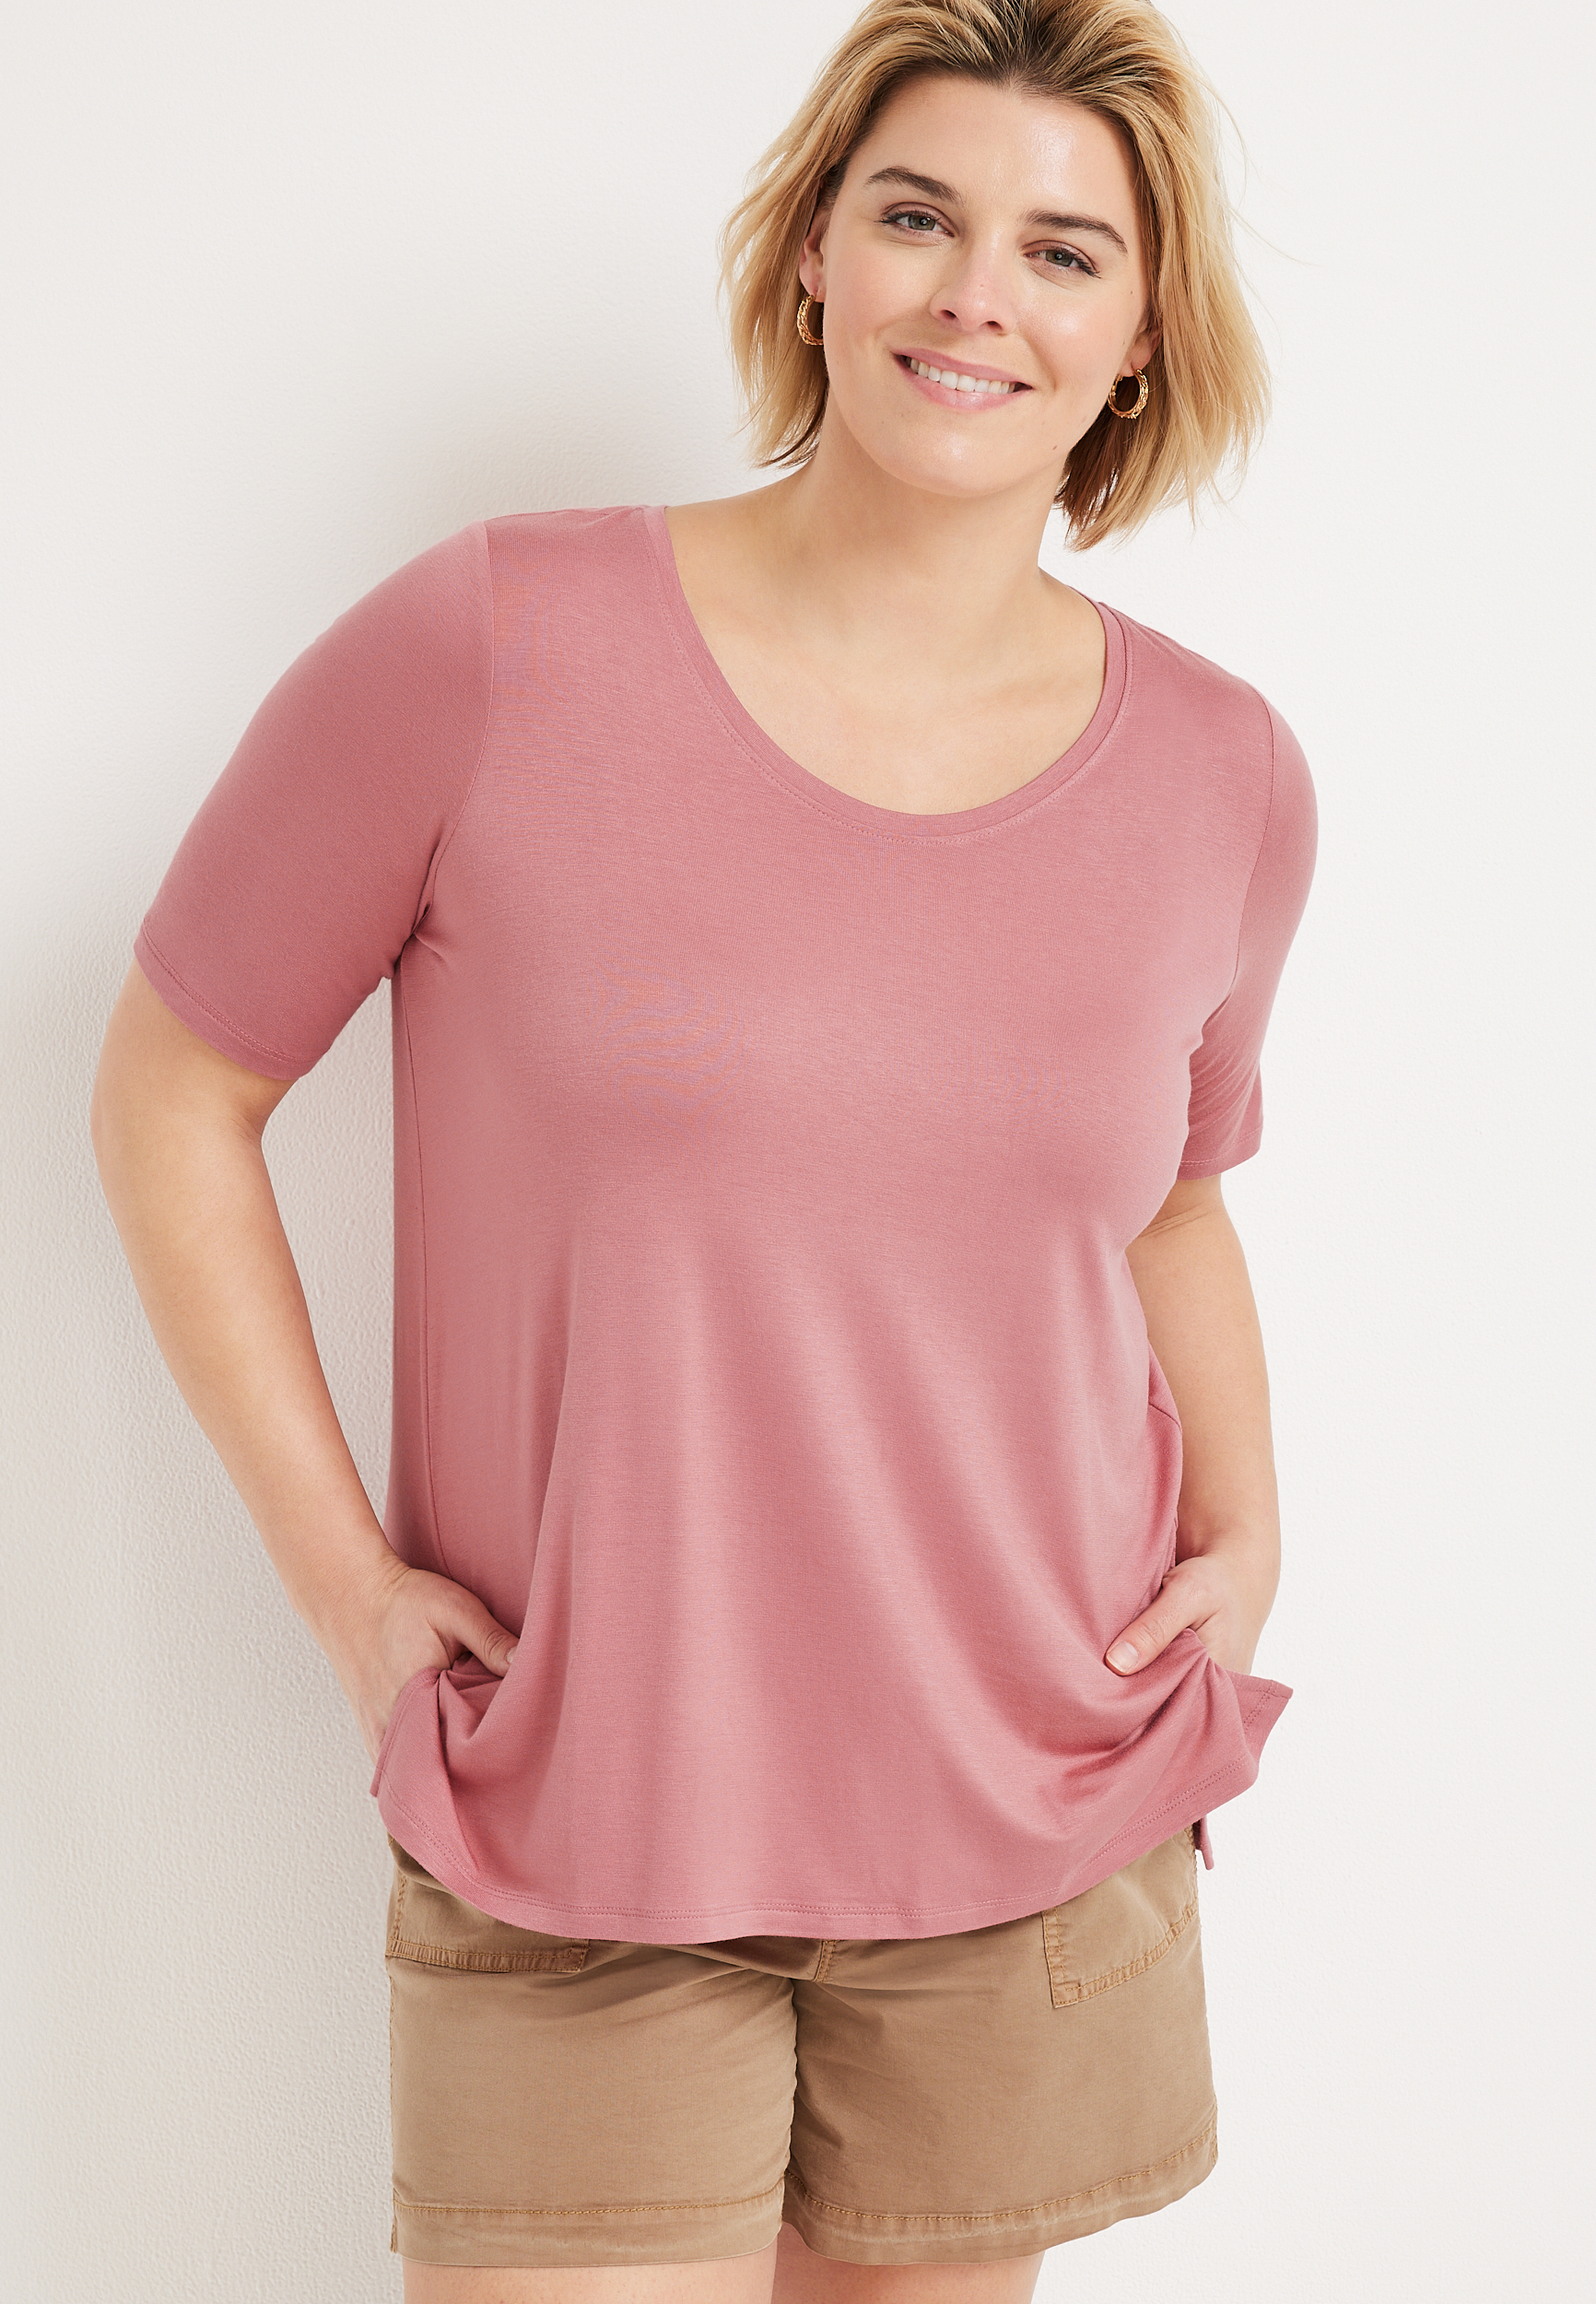 Plus Size 24/7 Flawless Solid Tunic Tee - Size 4X